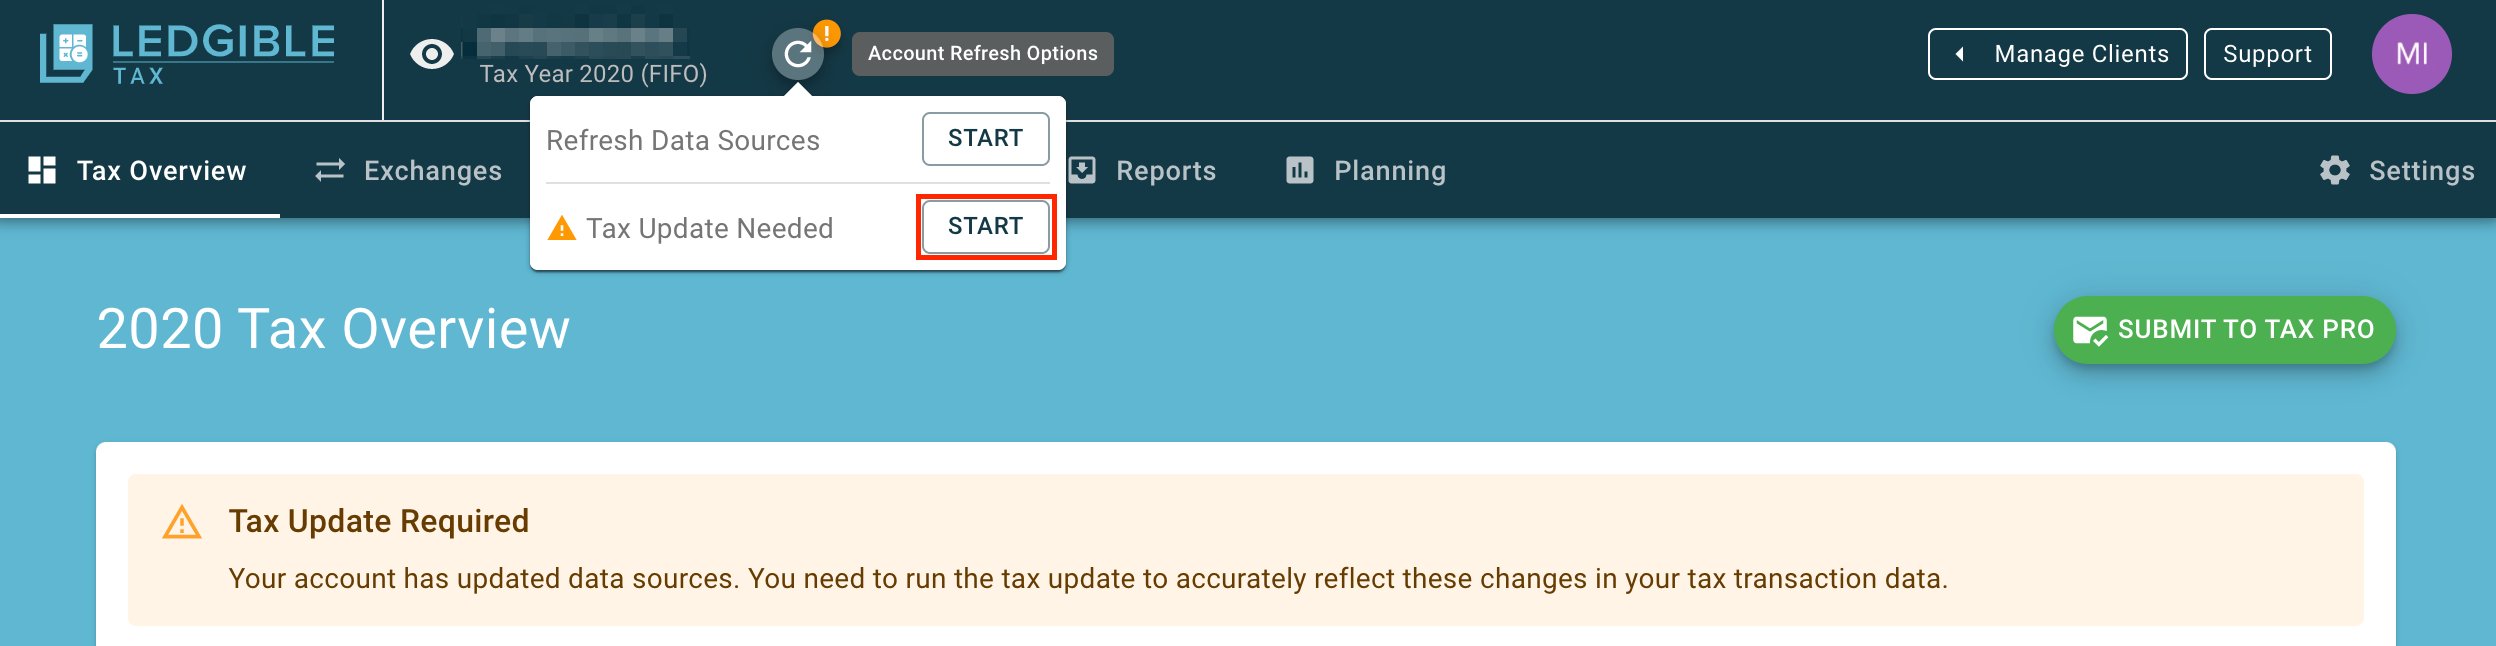 Tax_Update_Needed_-_Account_Refresh_Options_-_Start_Refresh.png